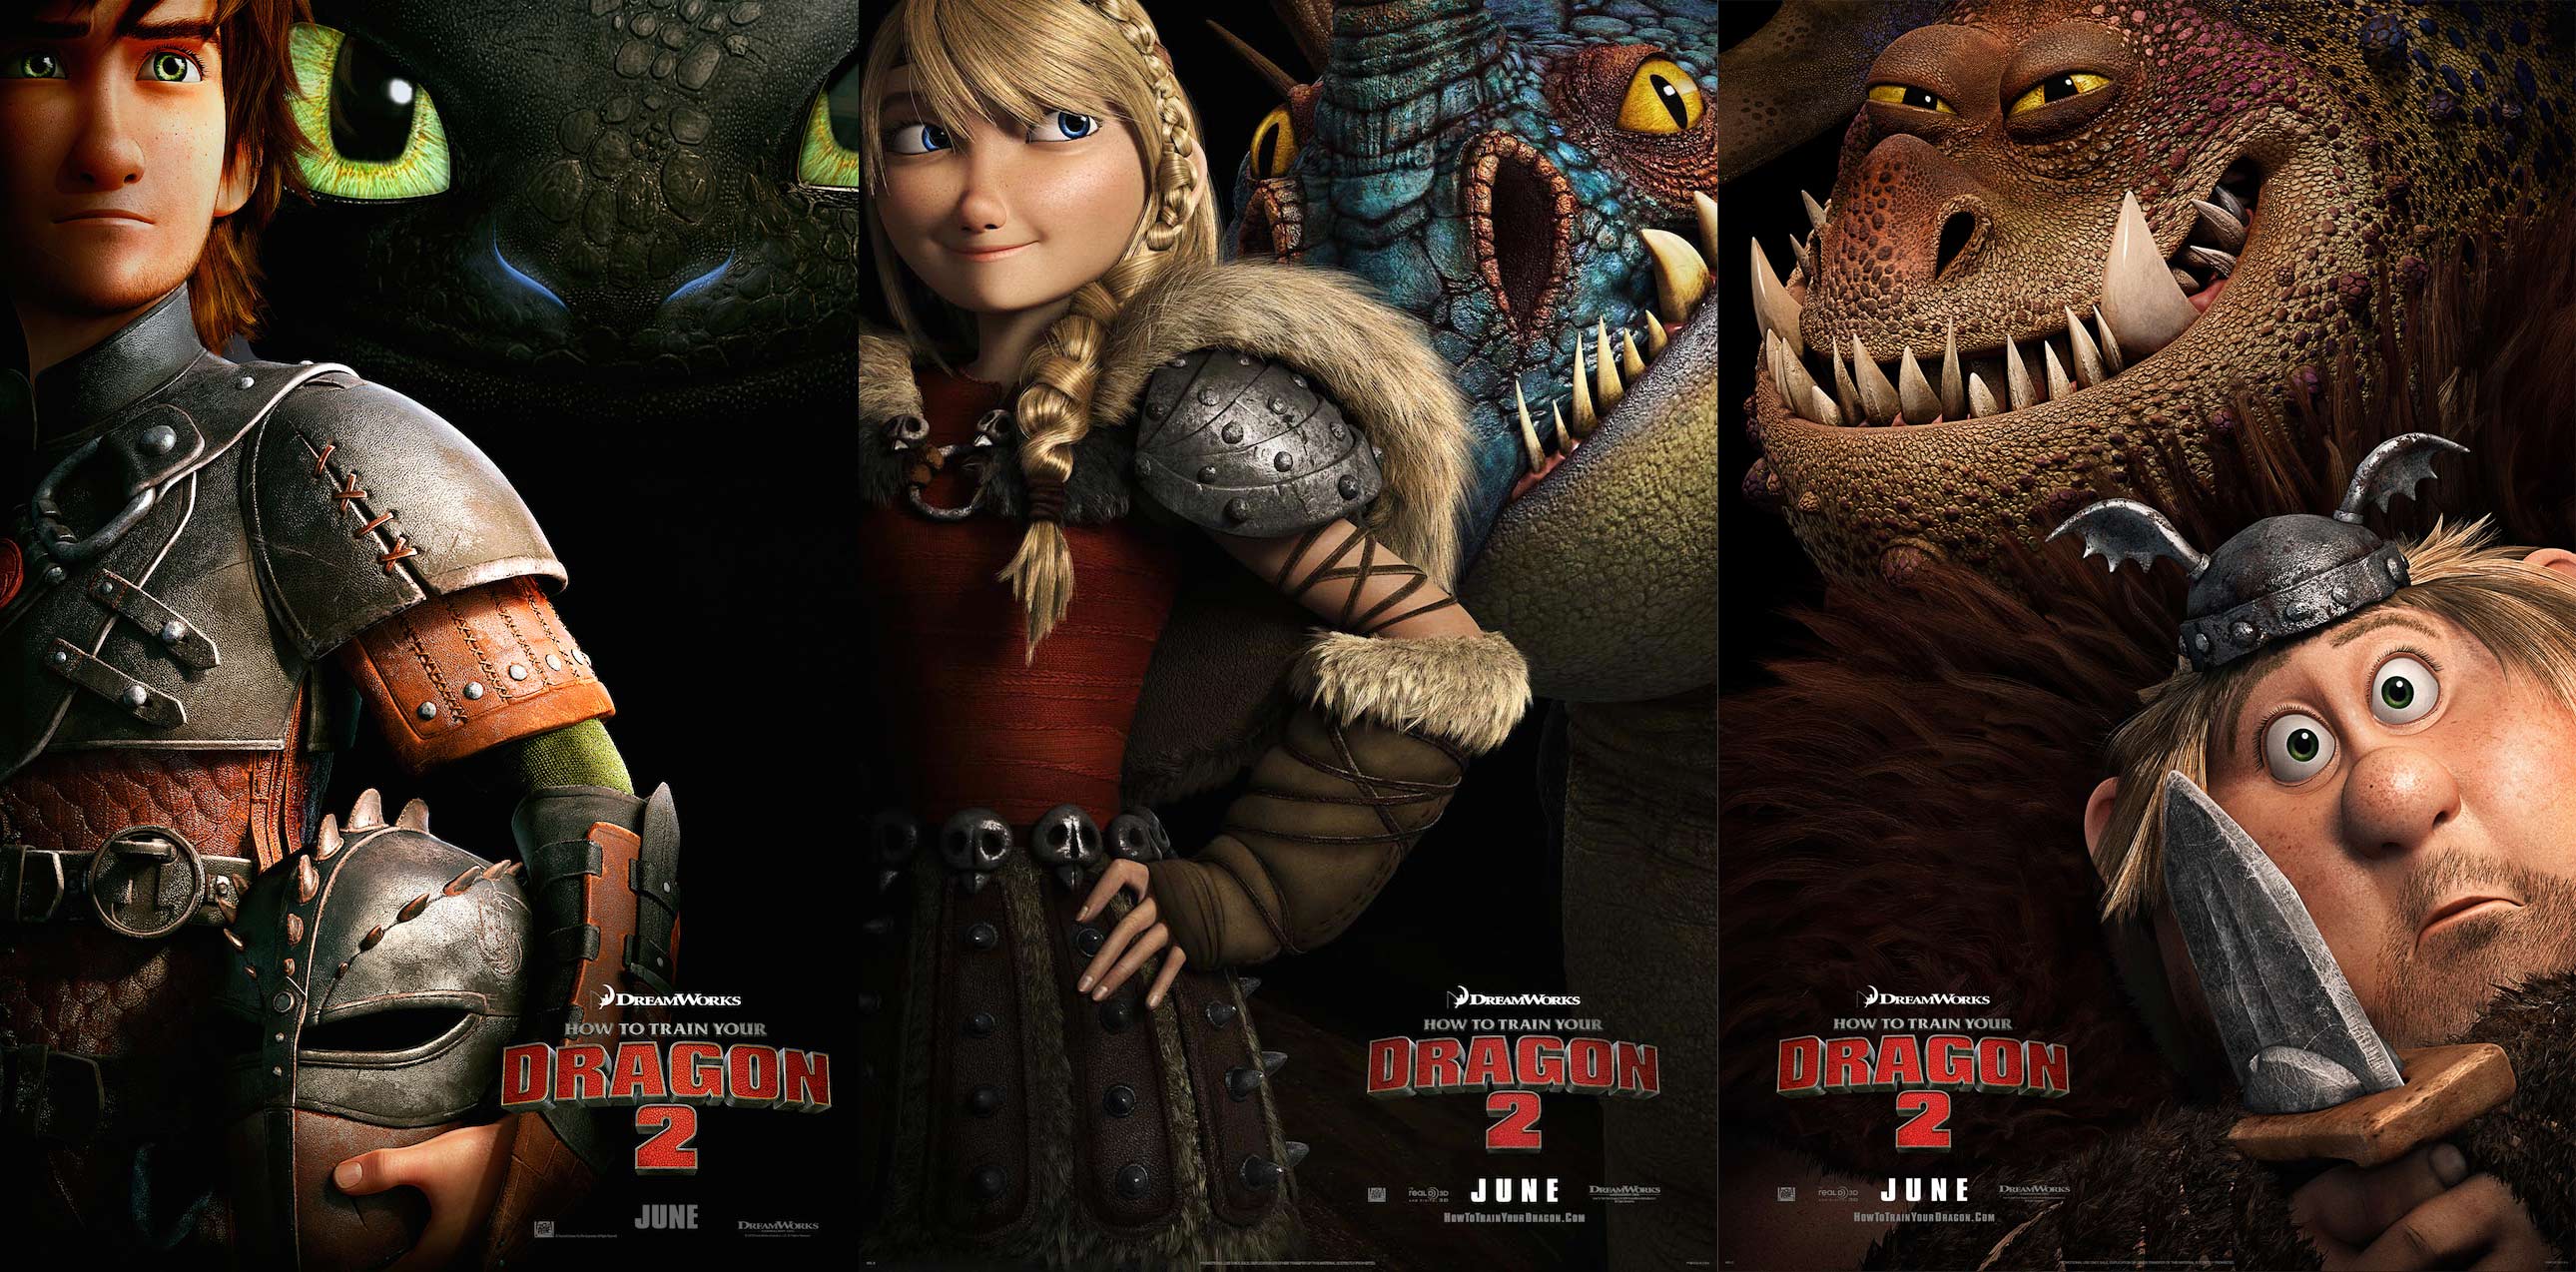 Hiccup Toothless Astrid Stormfly Fishlegs And Meatlug From How